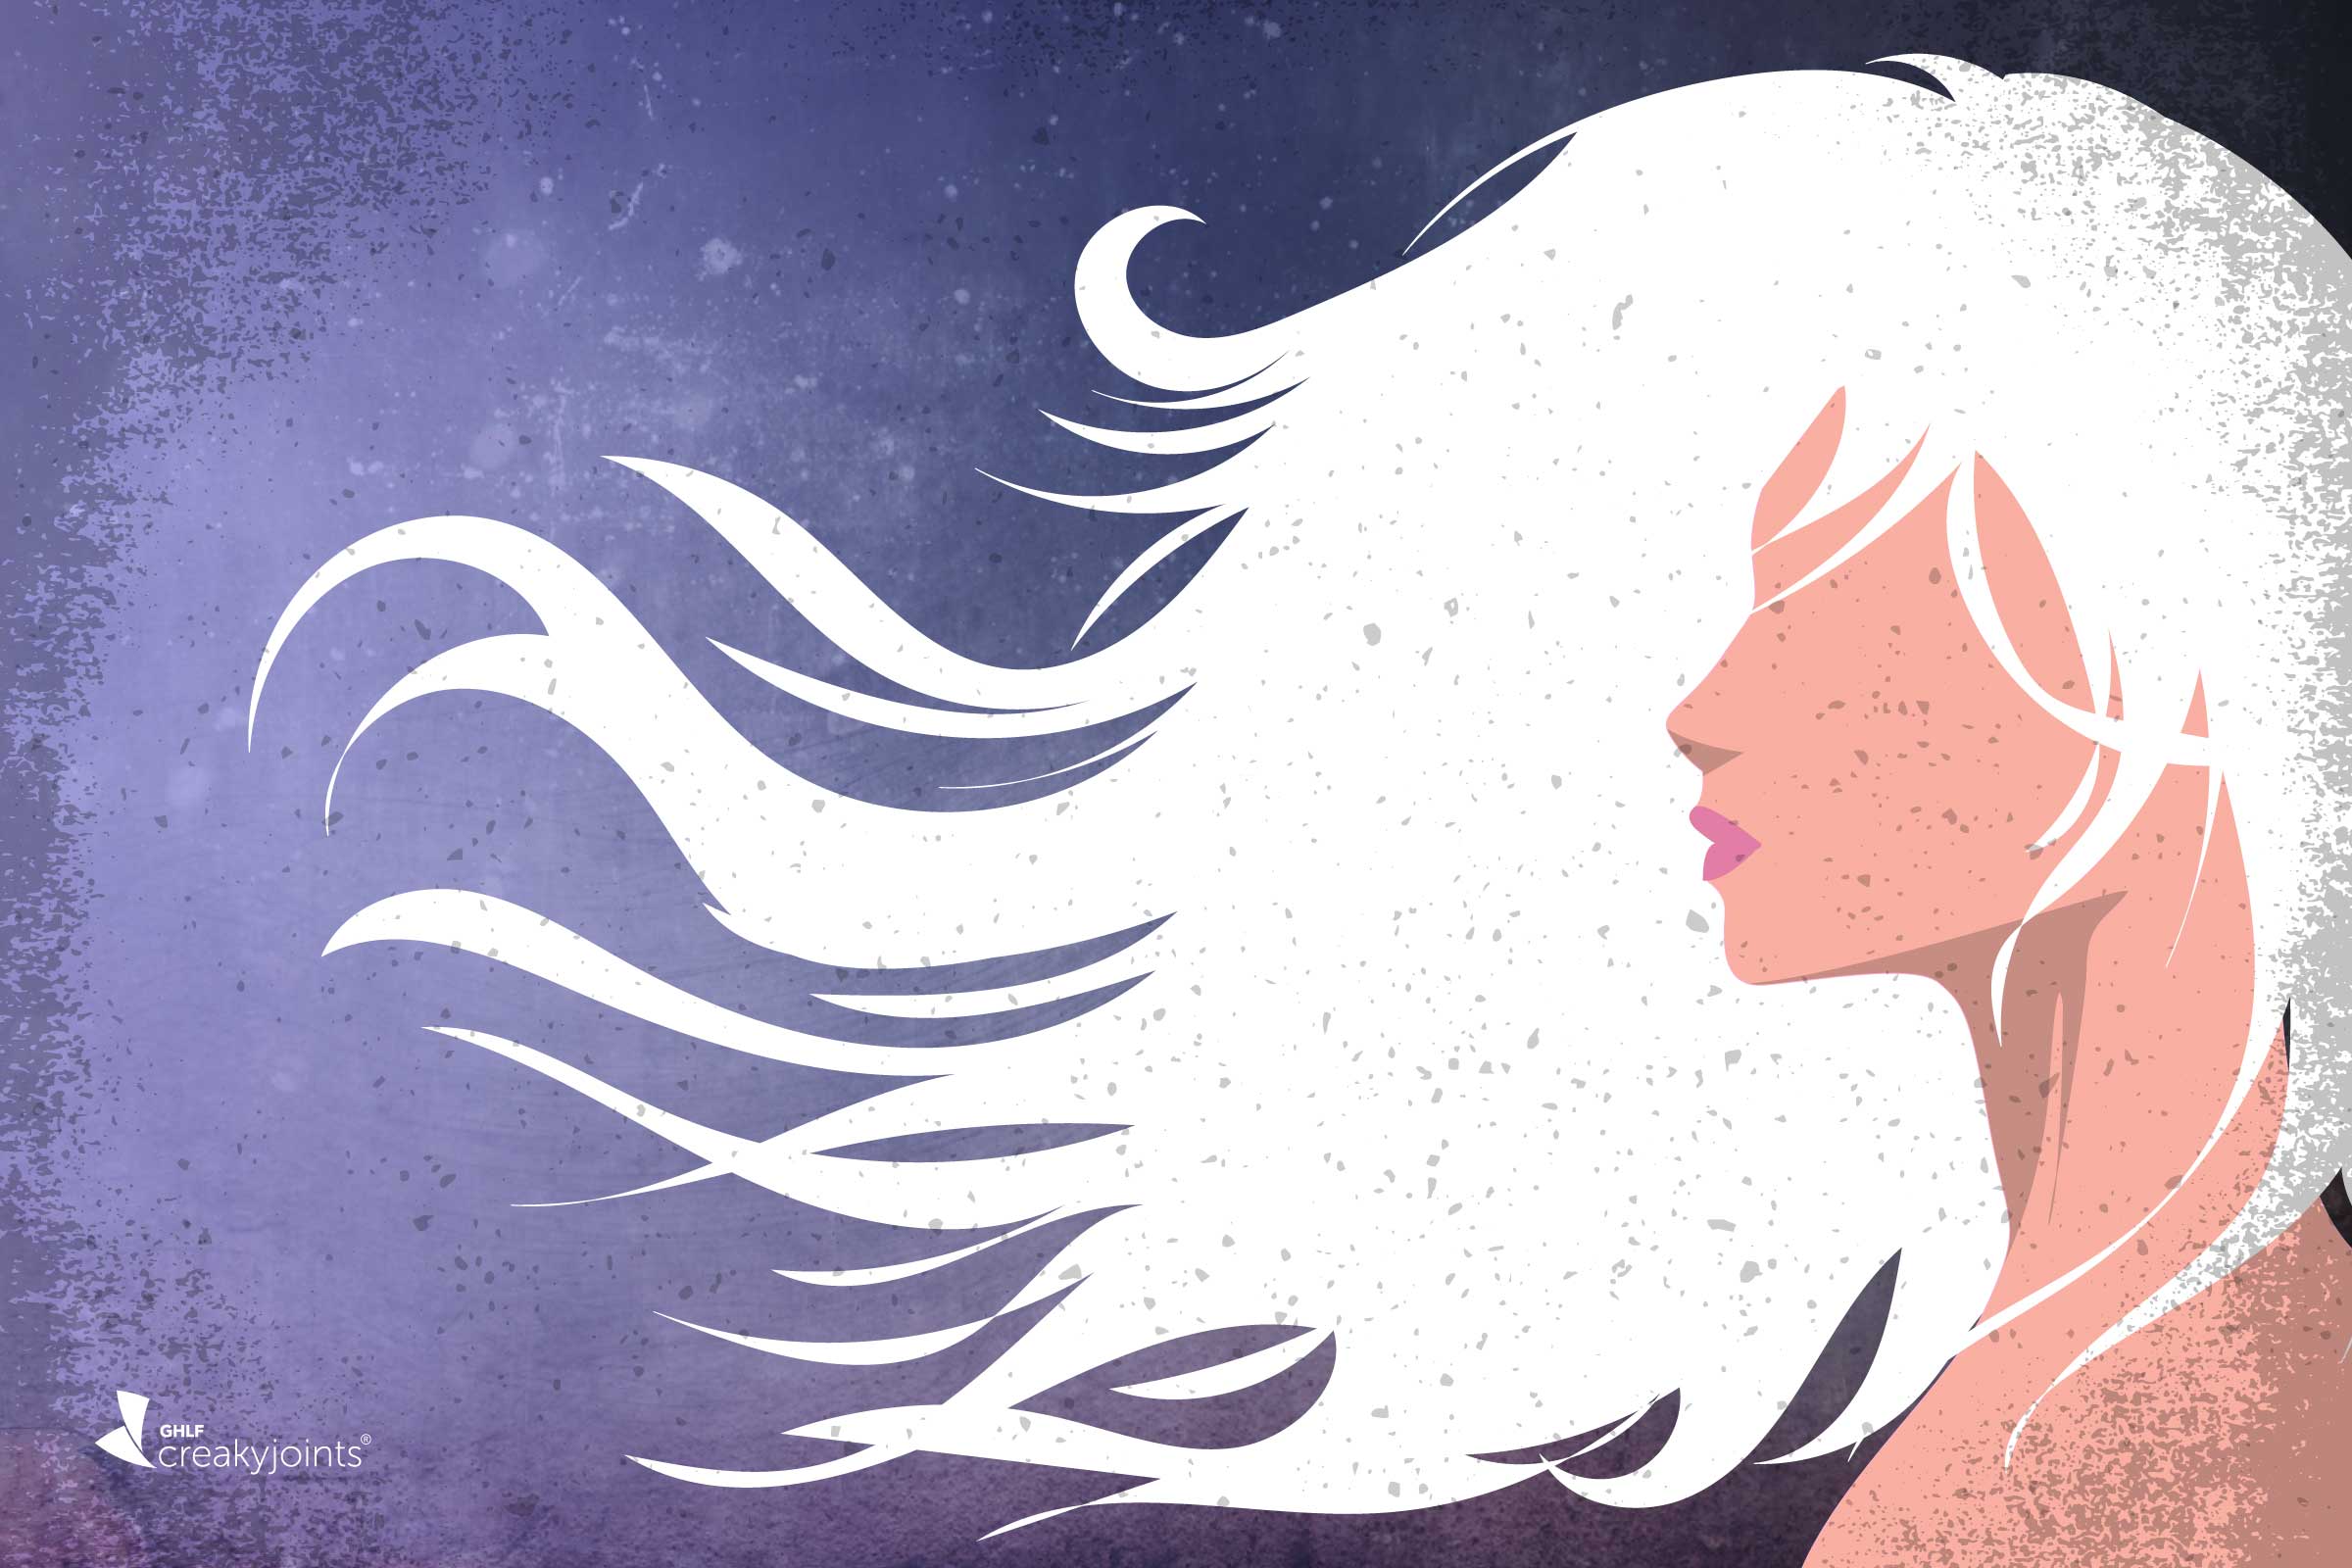 artwork shows the outline of a woman in front of a purple background. She has thick, long white hair blowing in the wind and there are speckles on the image